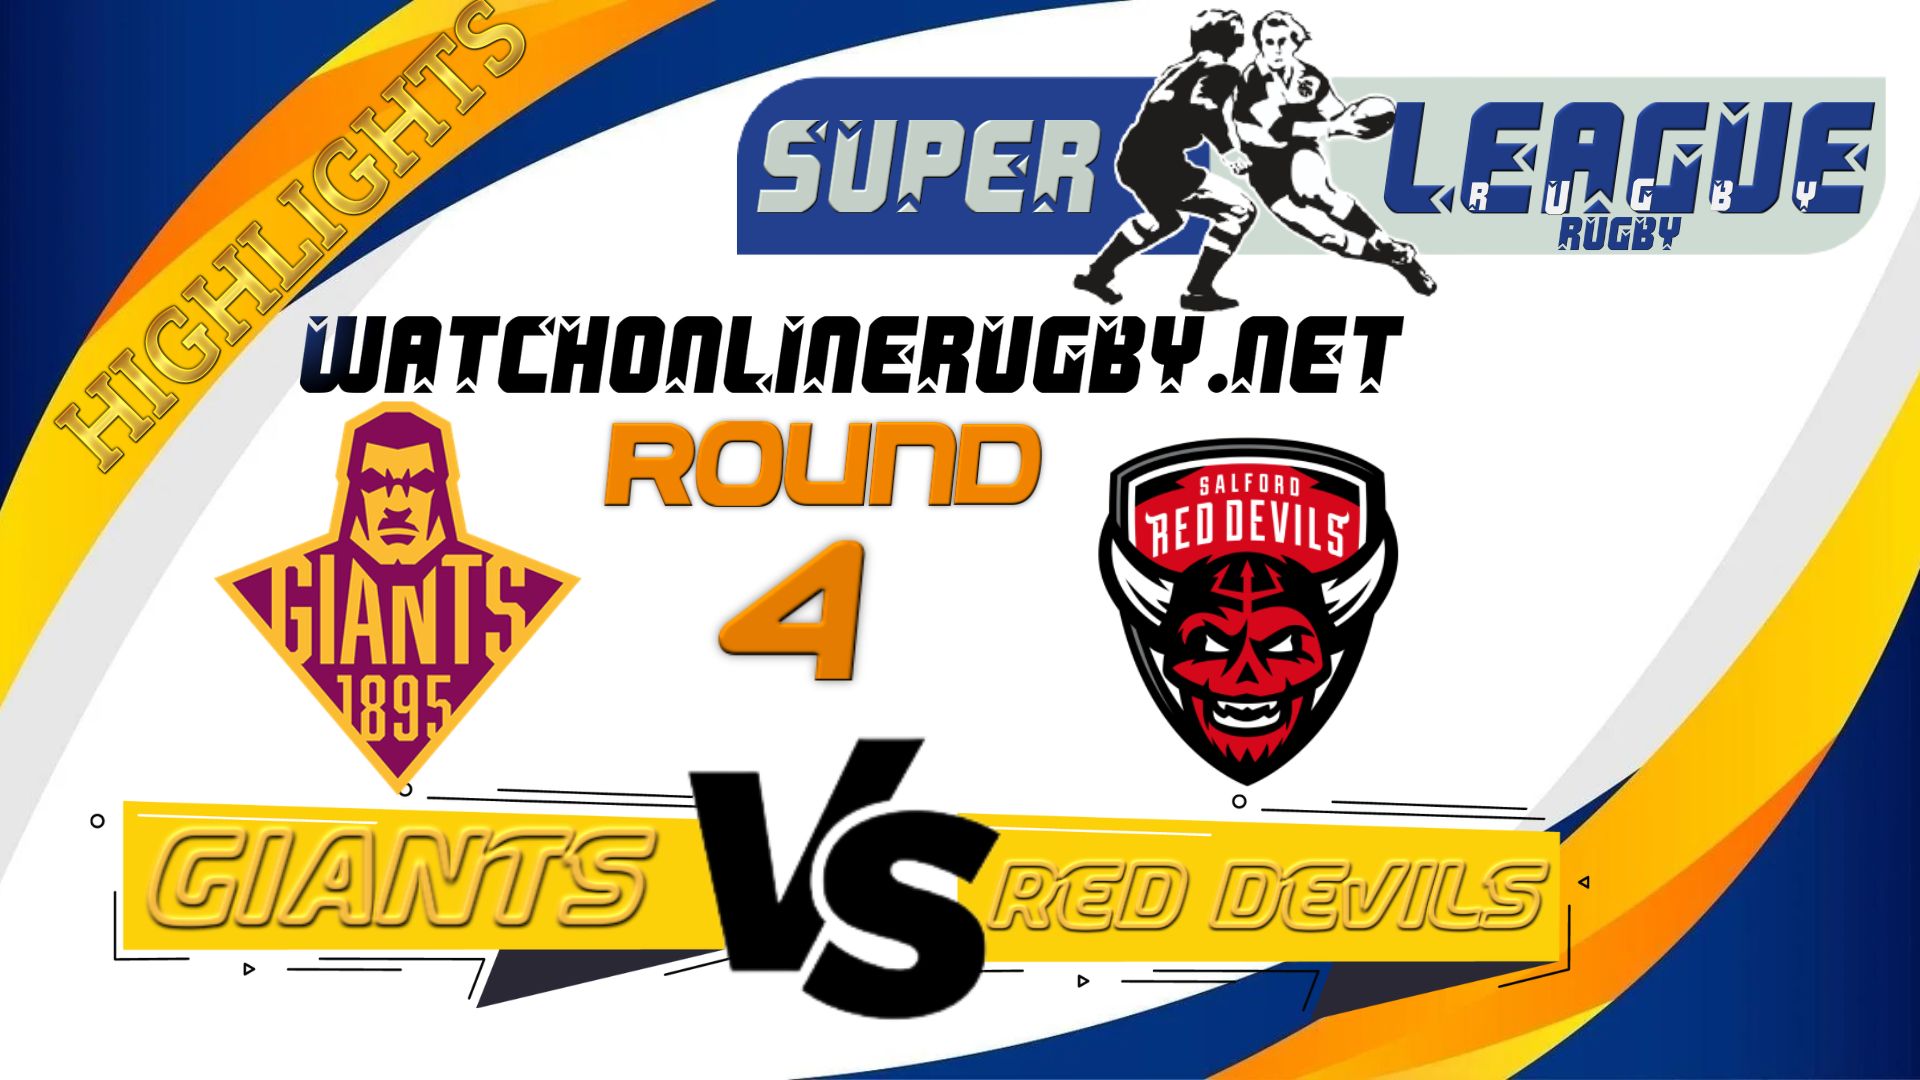 Huddersfield Giants Vs Salford Red Devils Super League Rugby 2022 RD 4